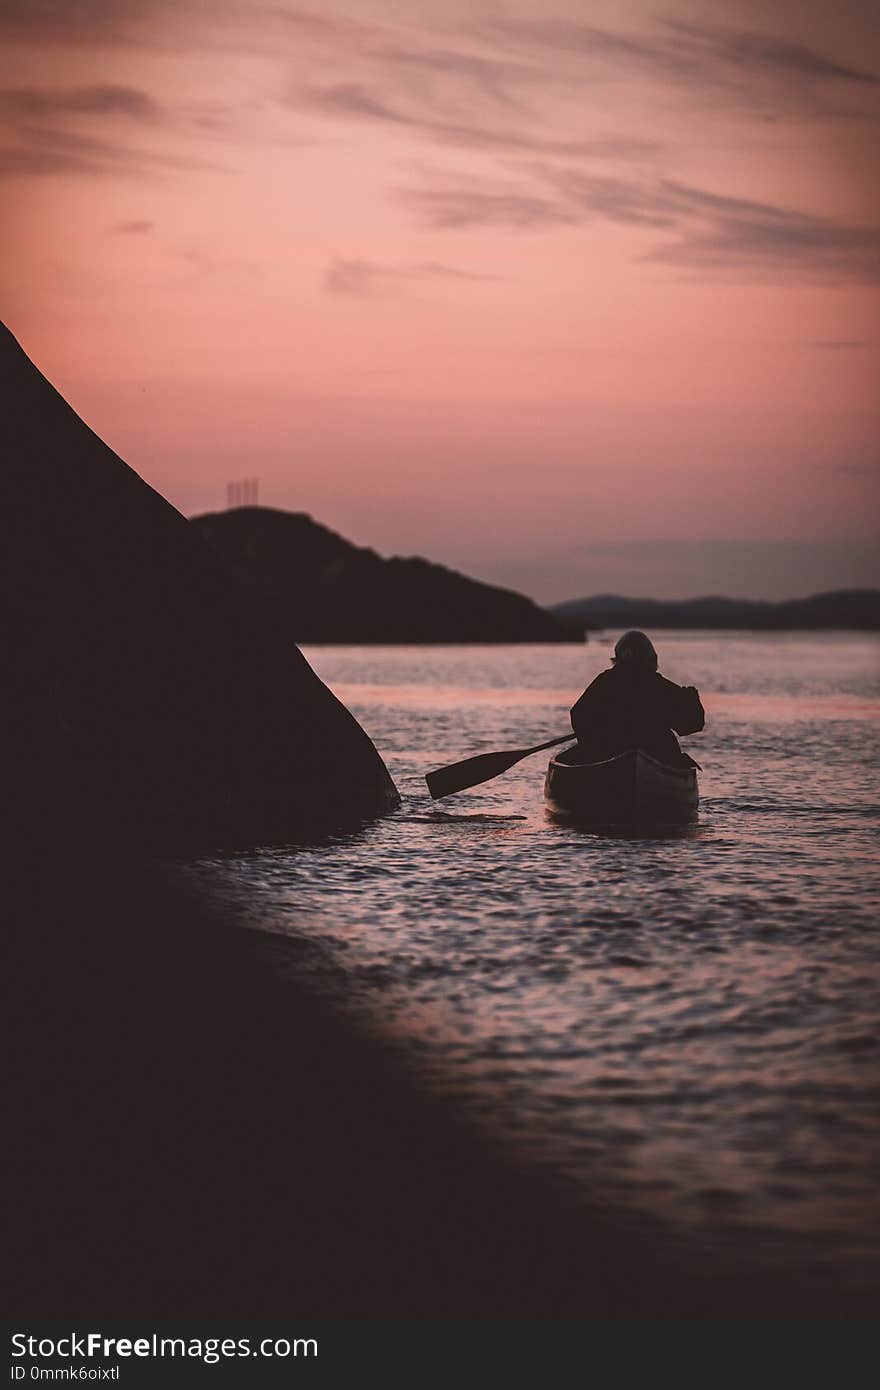 Canoeing on a late night with a sunset